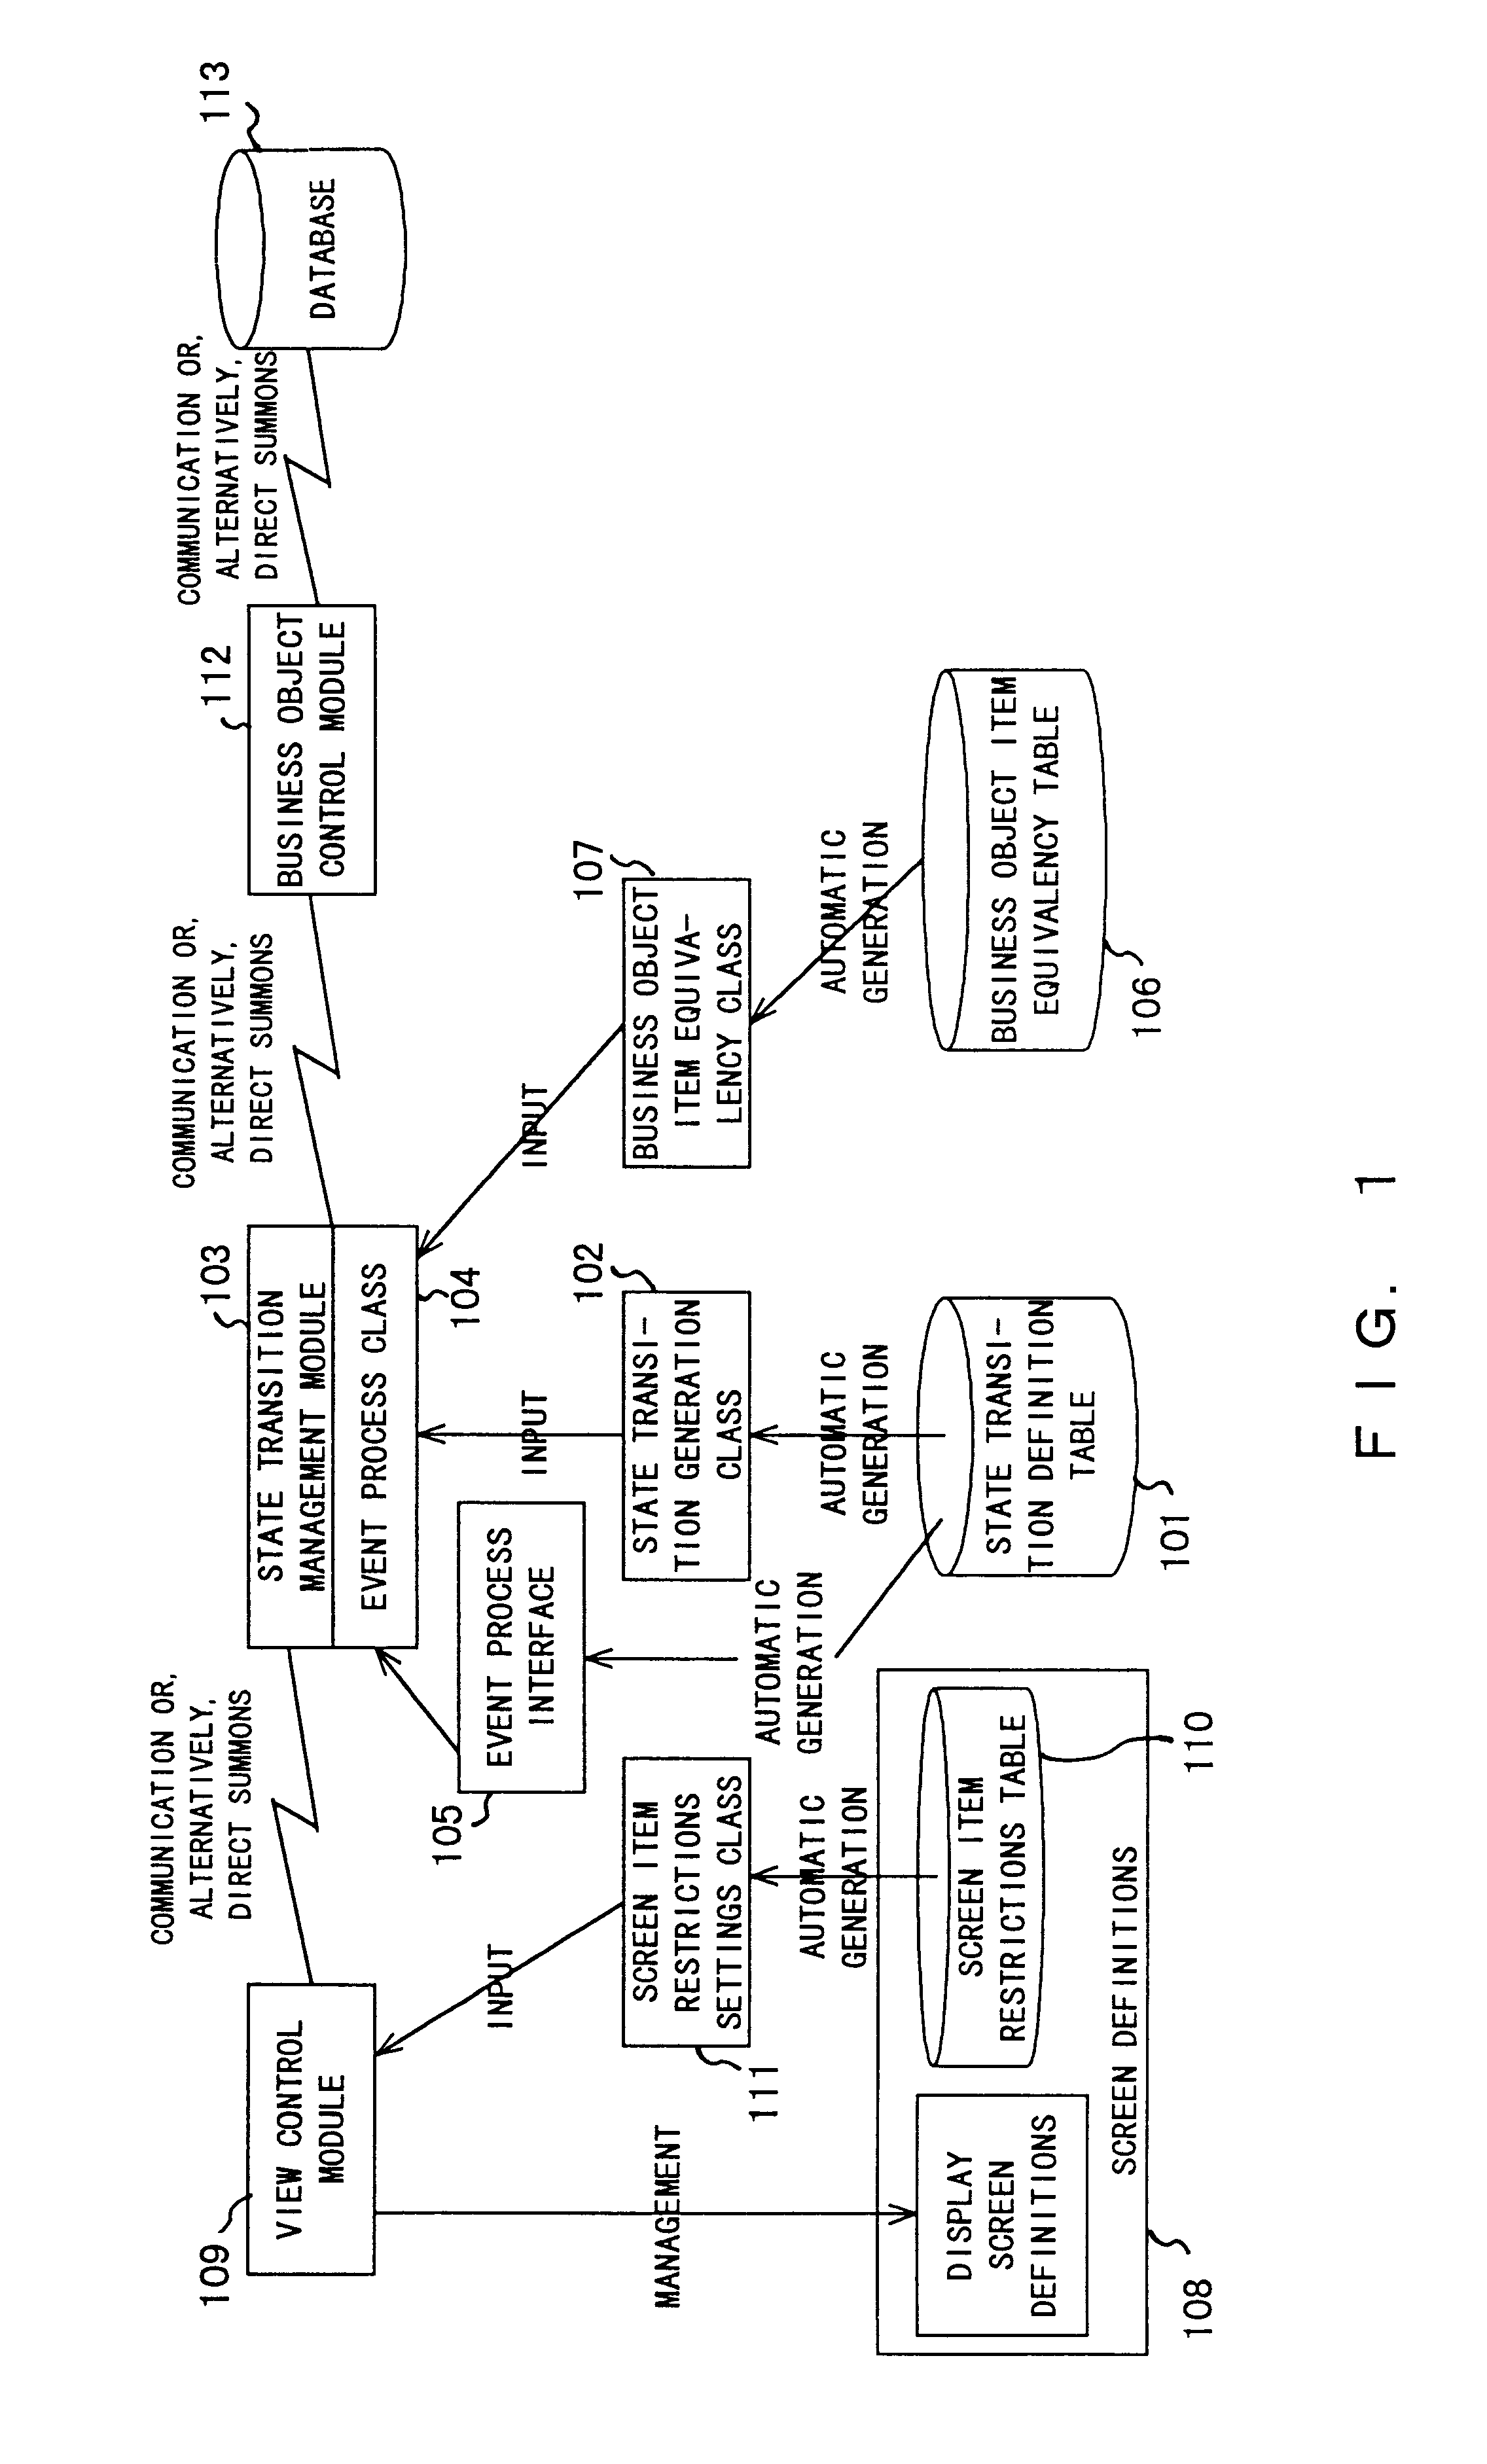 Apparatus for constructing and operating interactive software